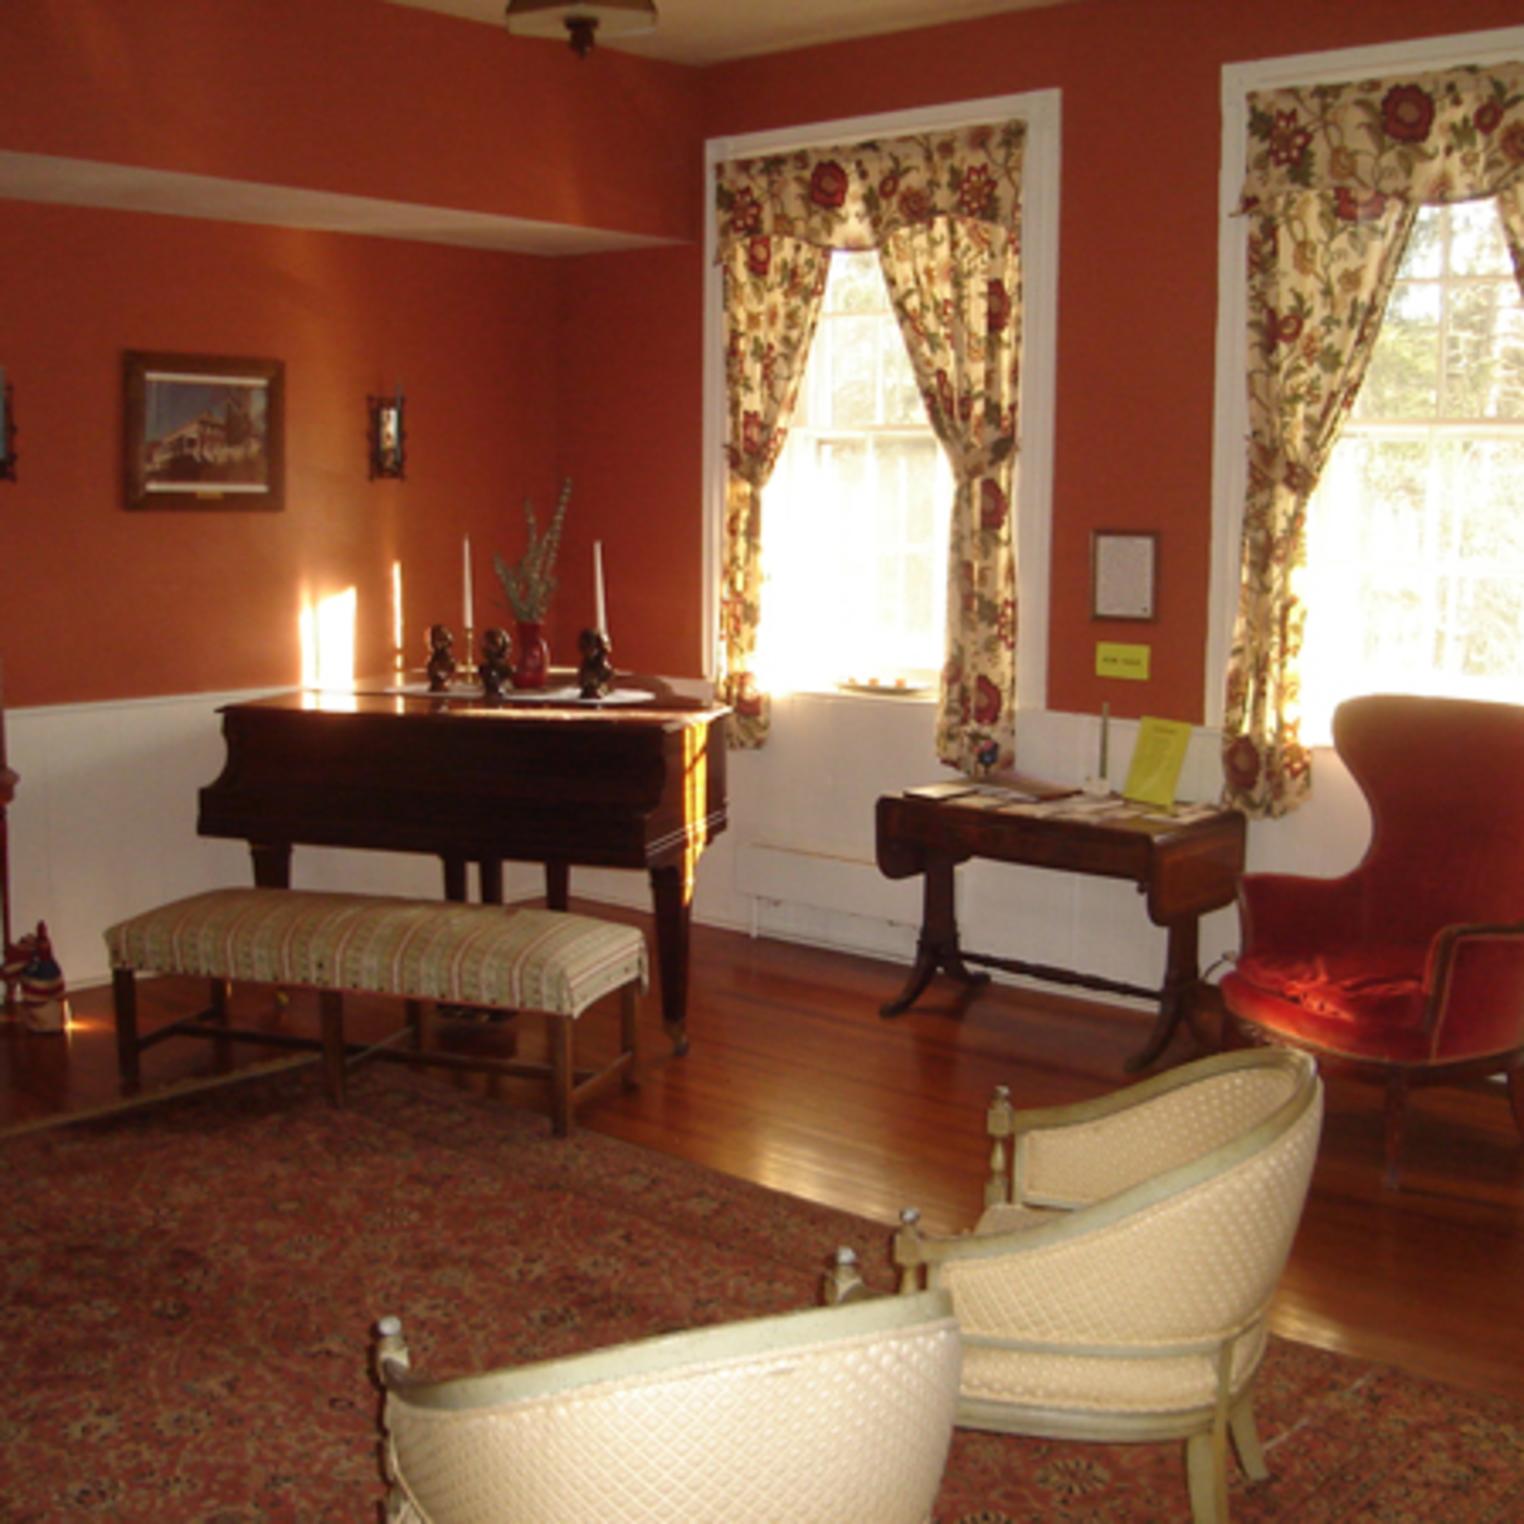 Piano Room at the Ironmaster's Mansion